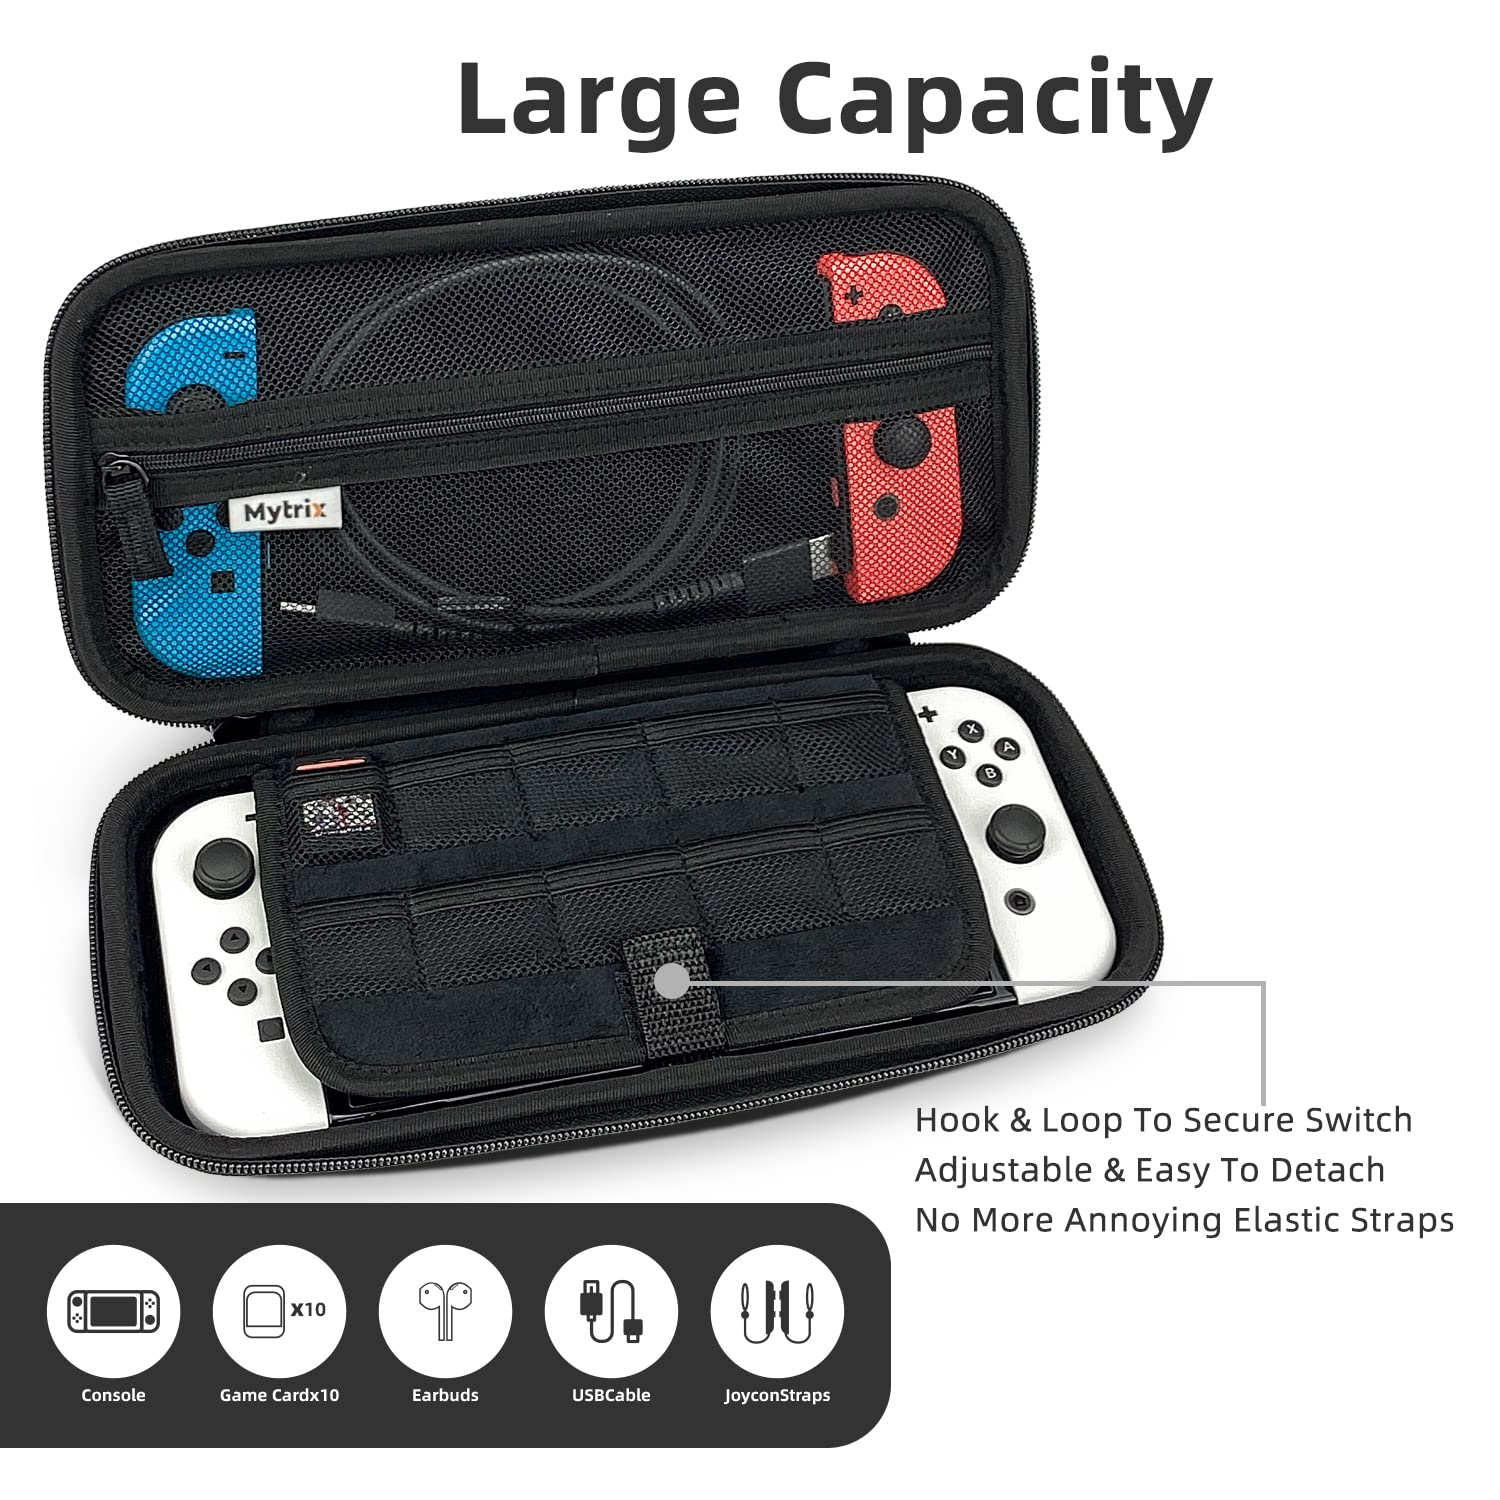 Mytrix Carrying Case for Nintendo Switch/OLED/Lite, Portable Hard Shell Pouch for Switch Console Accessories Protective Travel Storage Bag for Switch with10 Game Card Slots, White (Samurai)